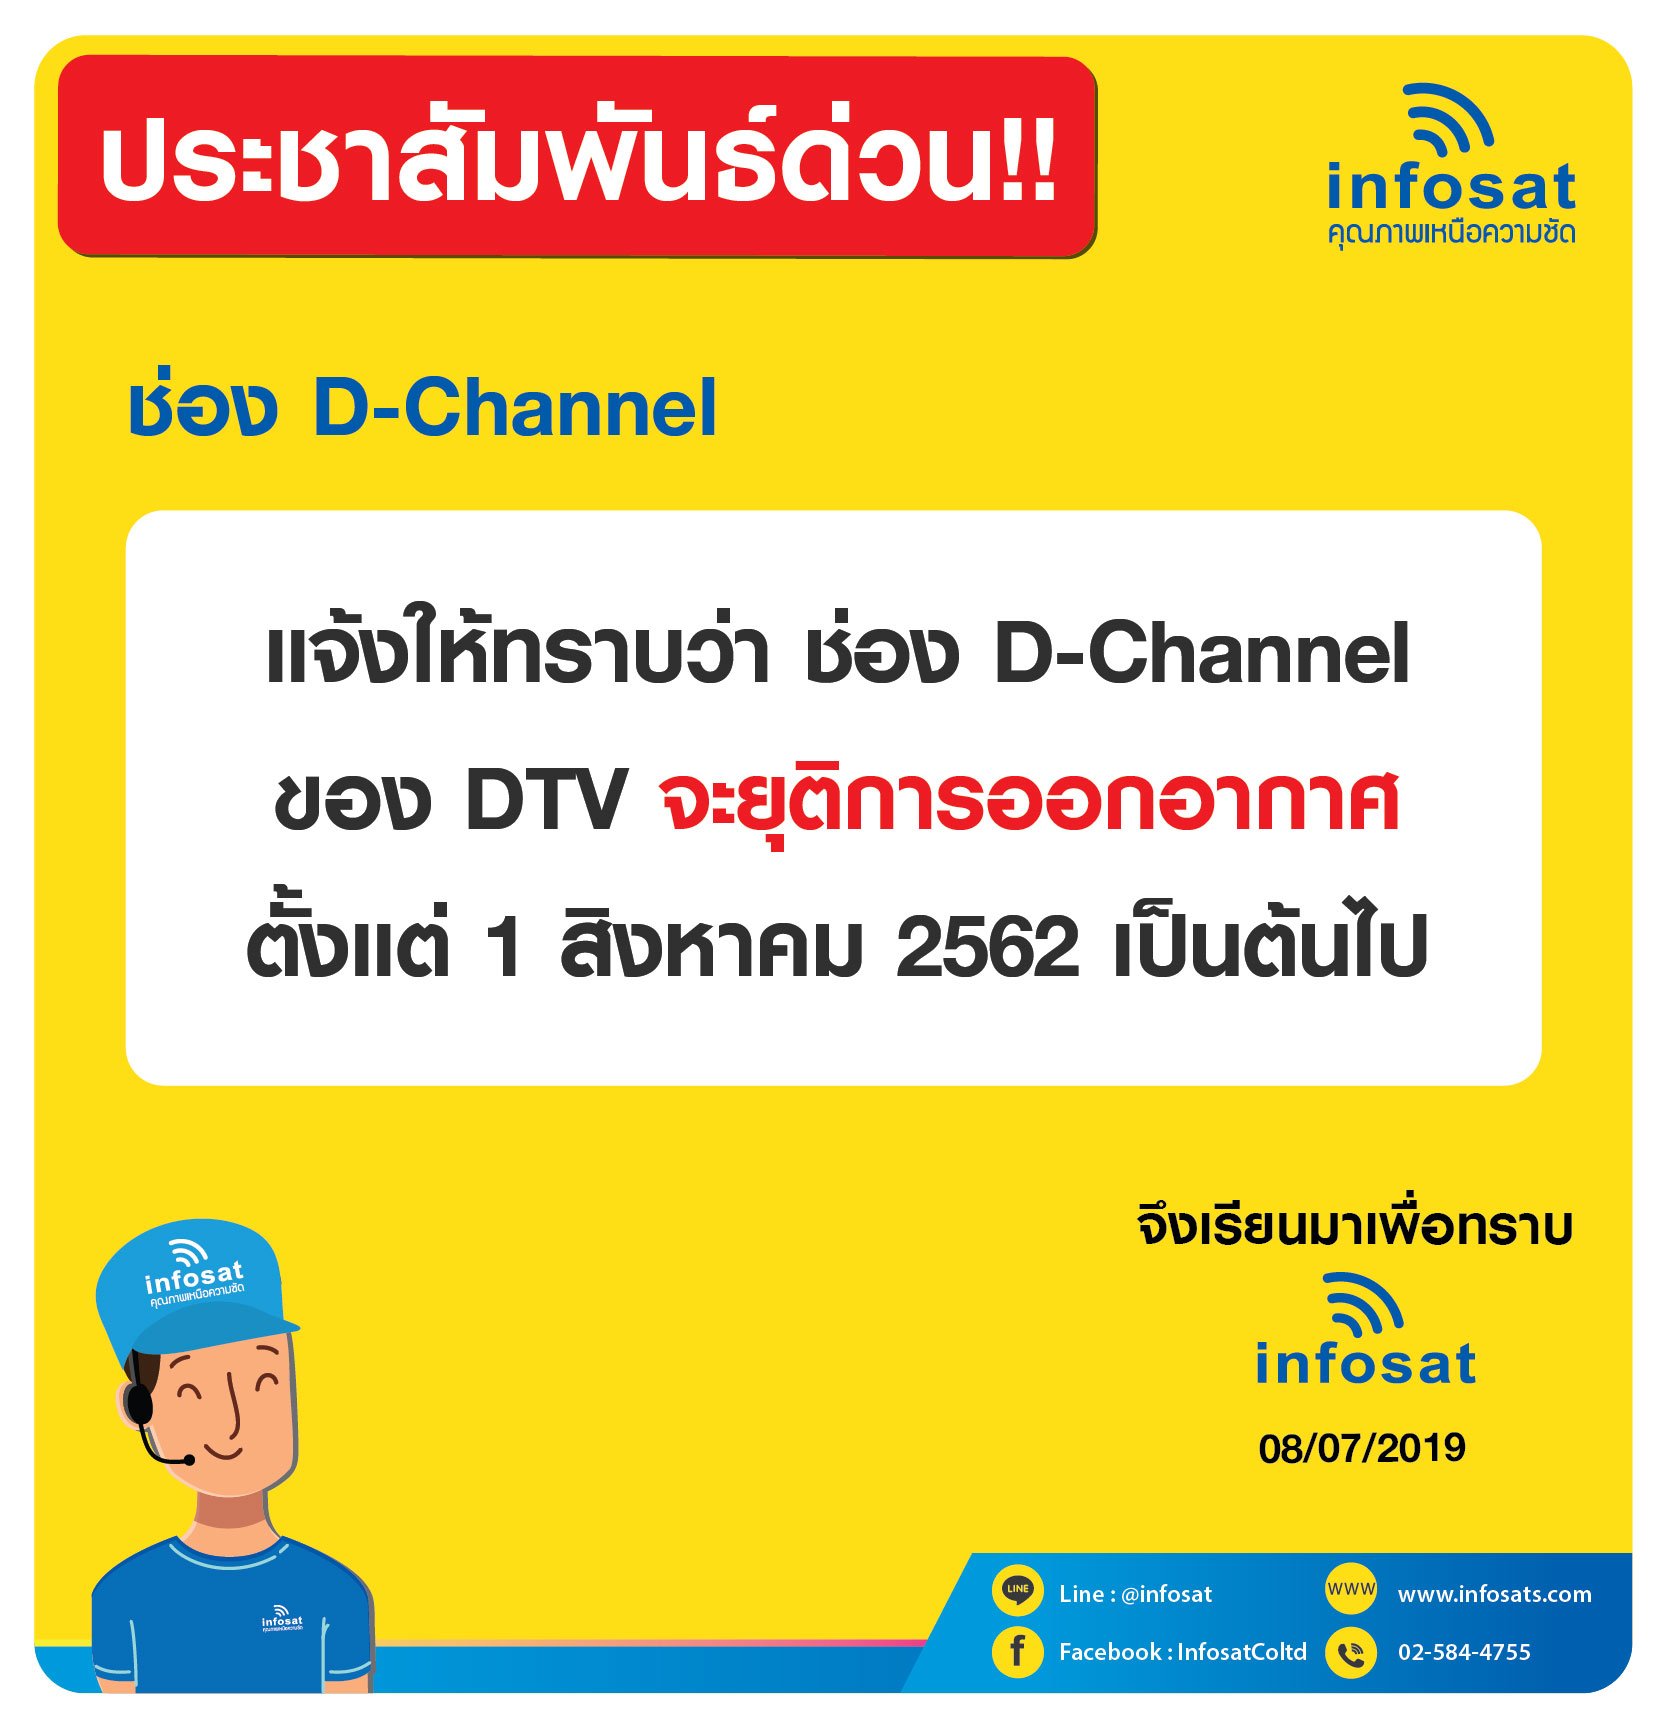 D-Channel will stop broadcasting from 1 August 2019.